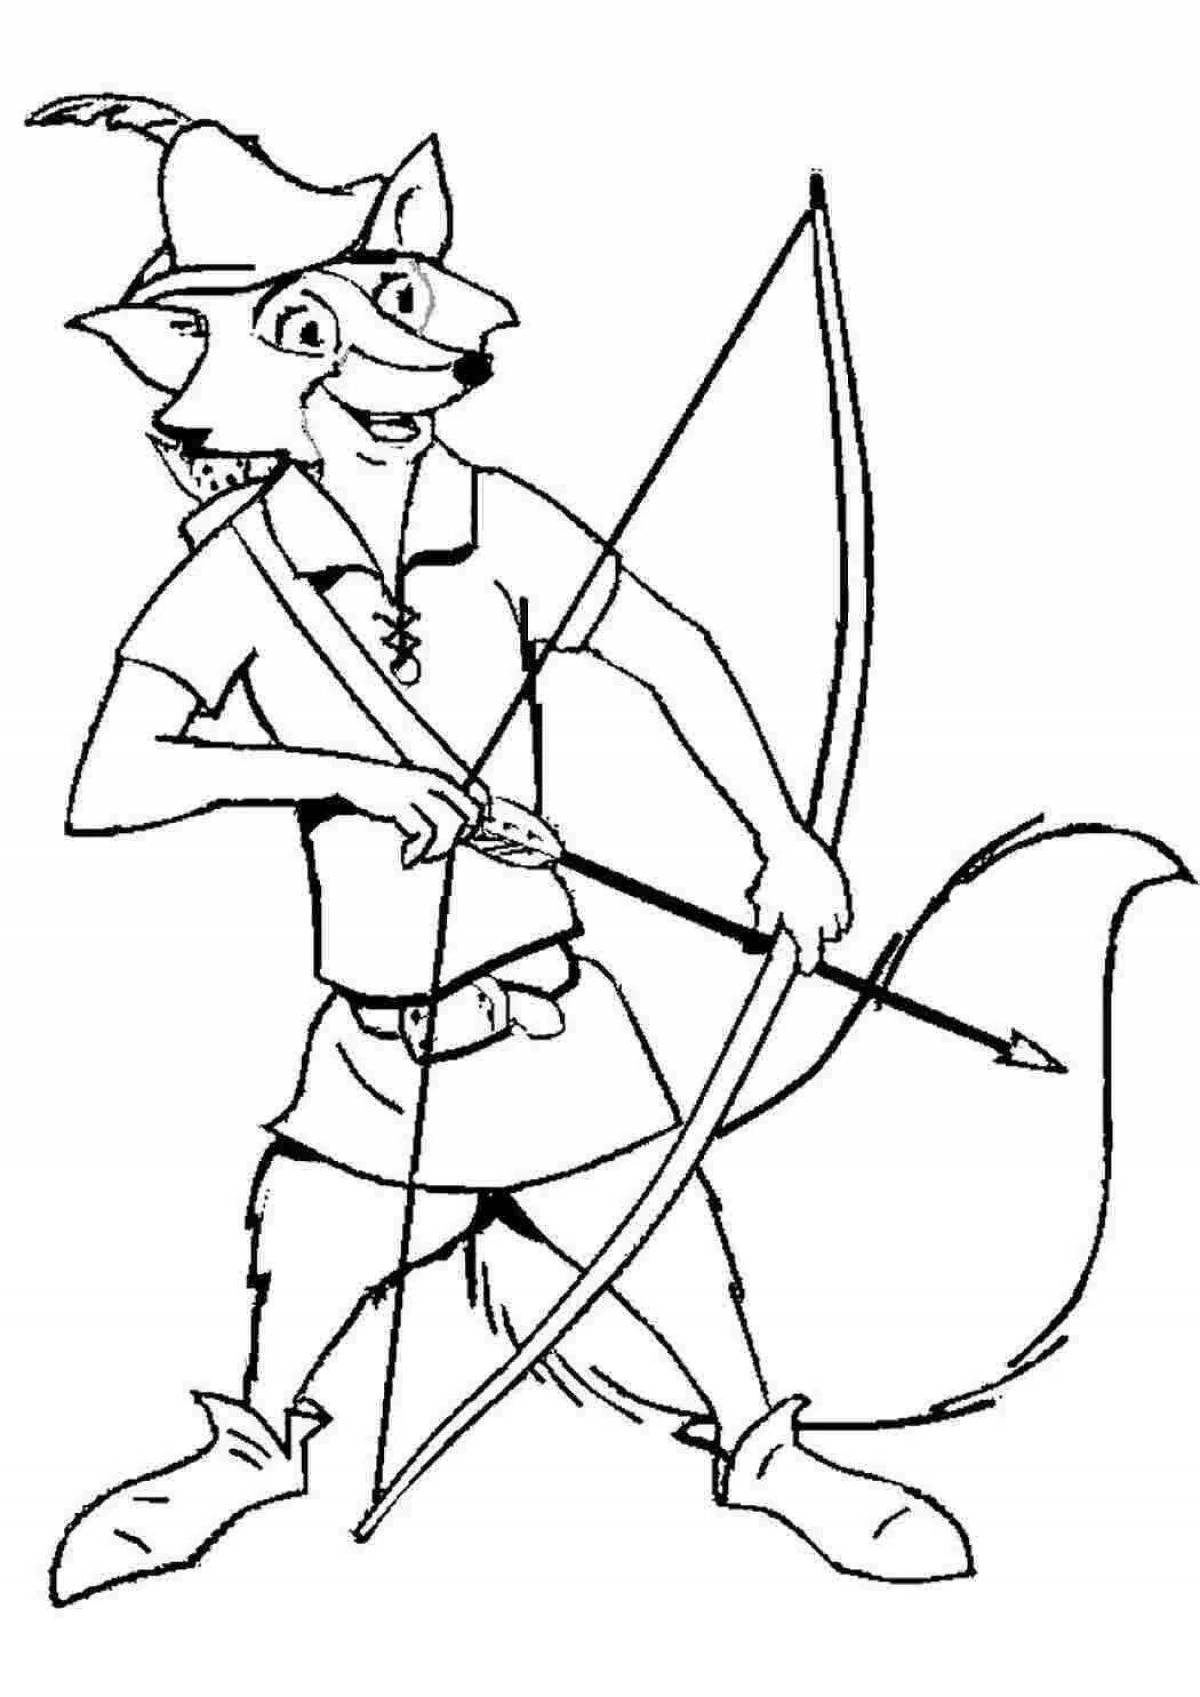 Royal bow and arrow coloring page